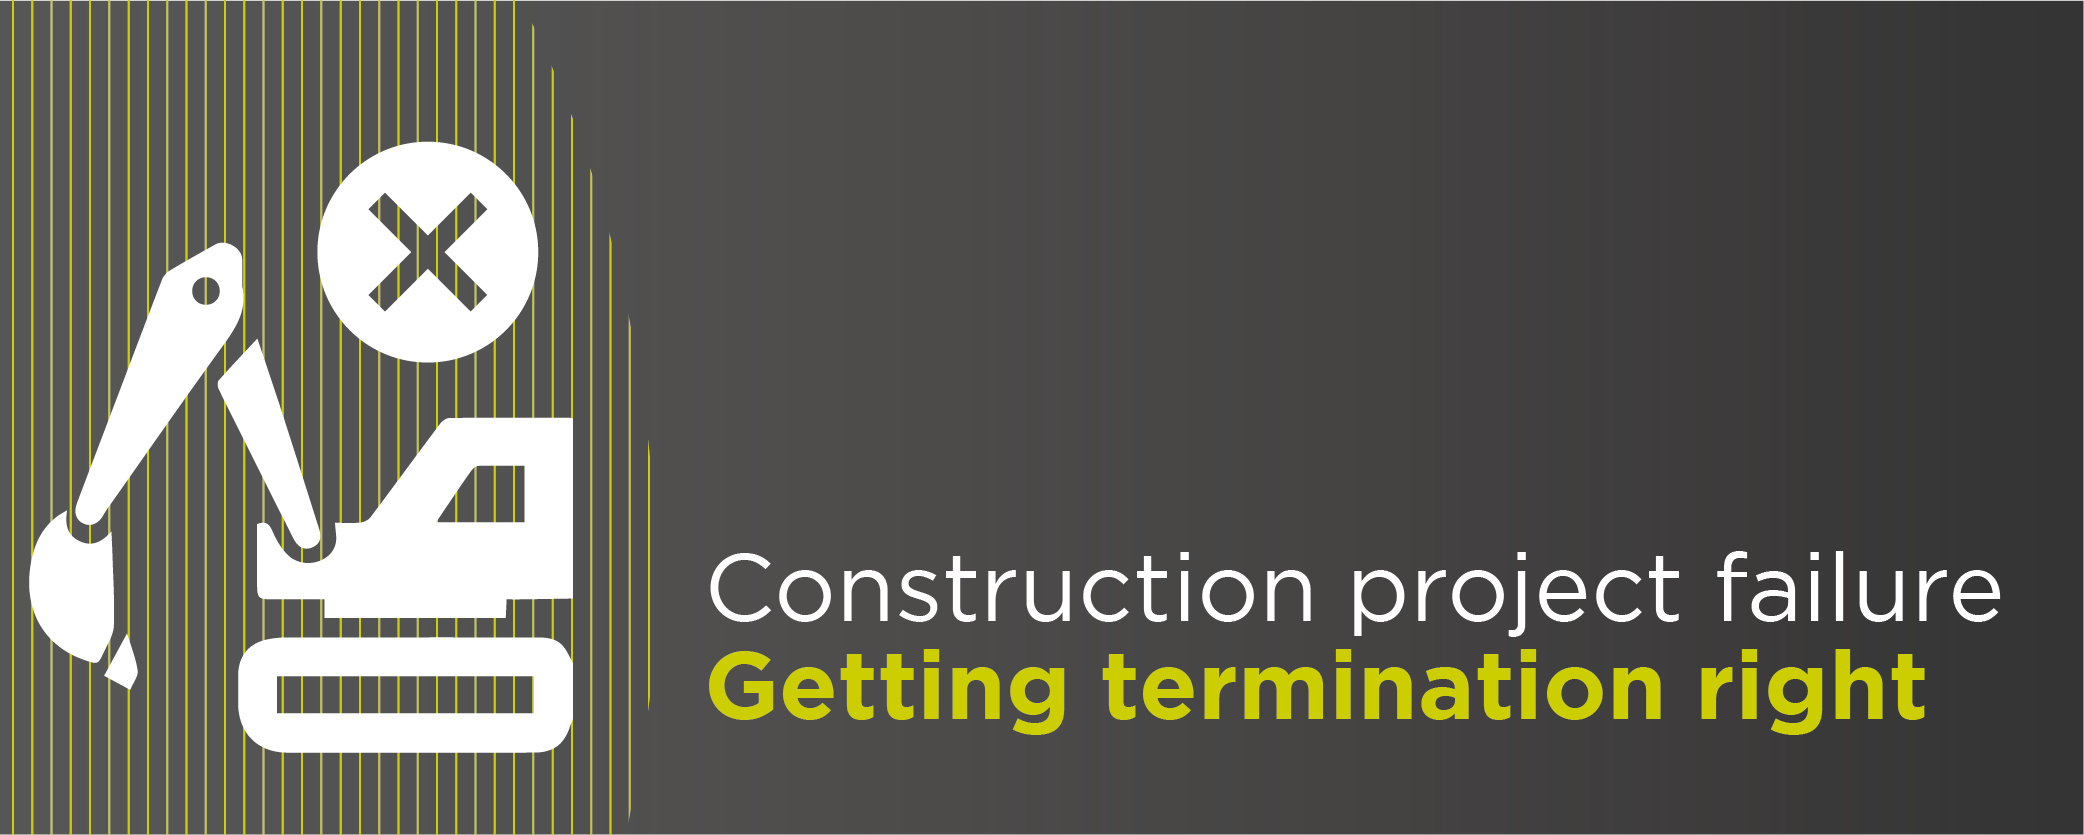 Construction project failure - getting termination right "Dos and "donts" 